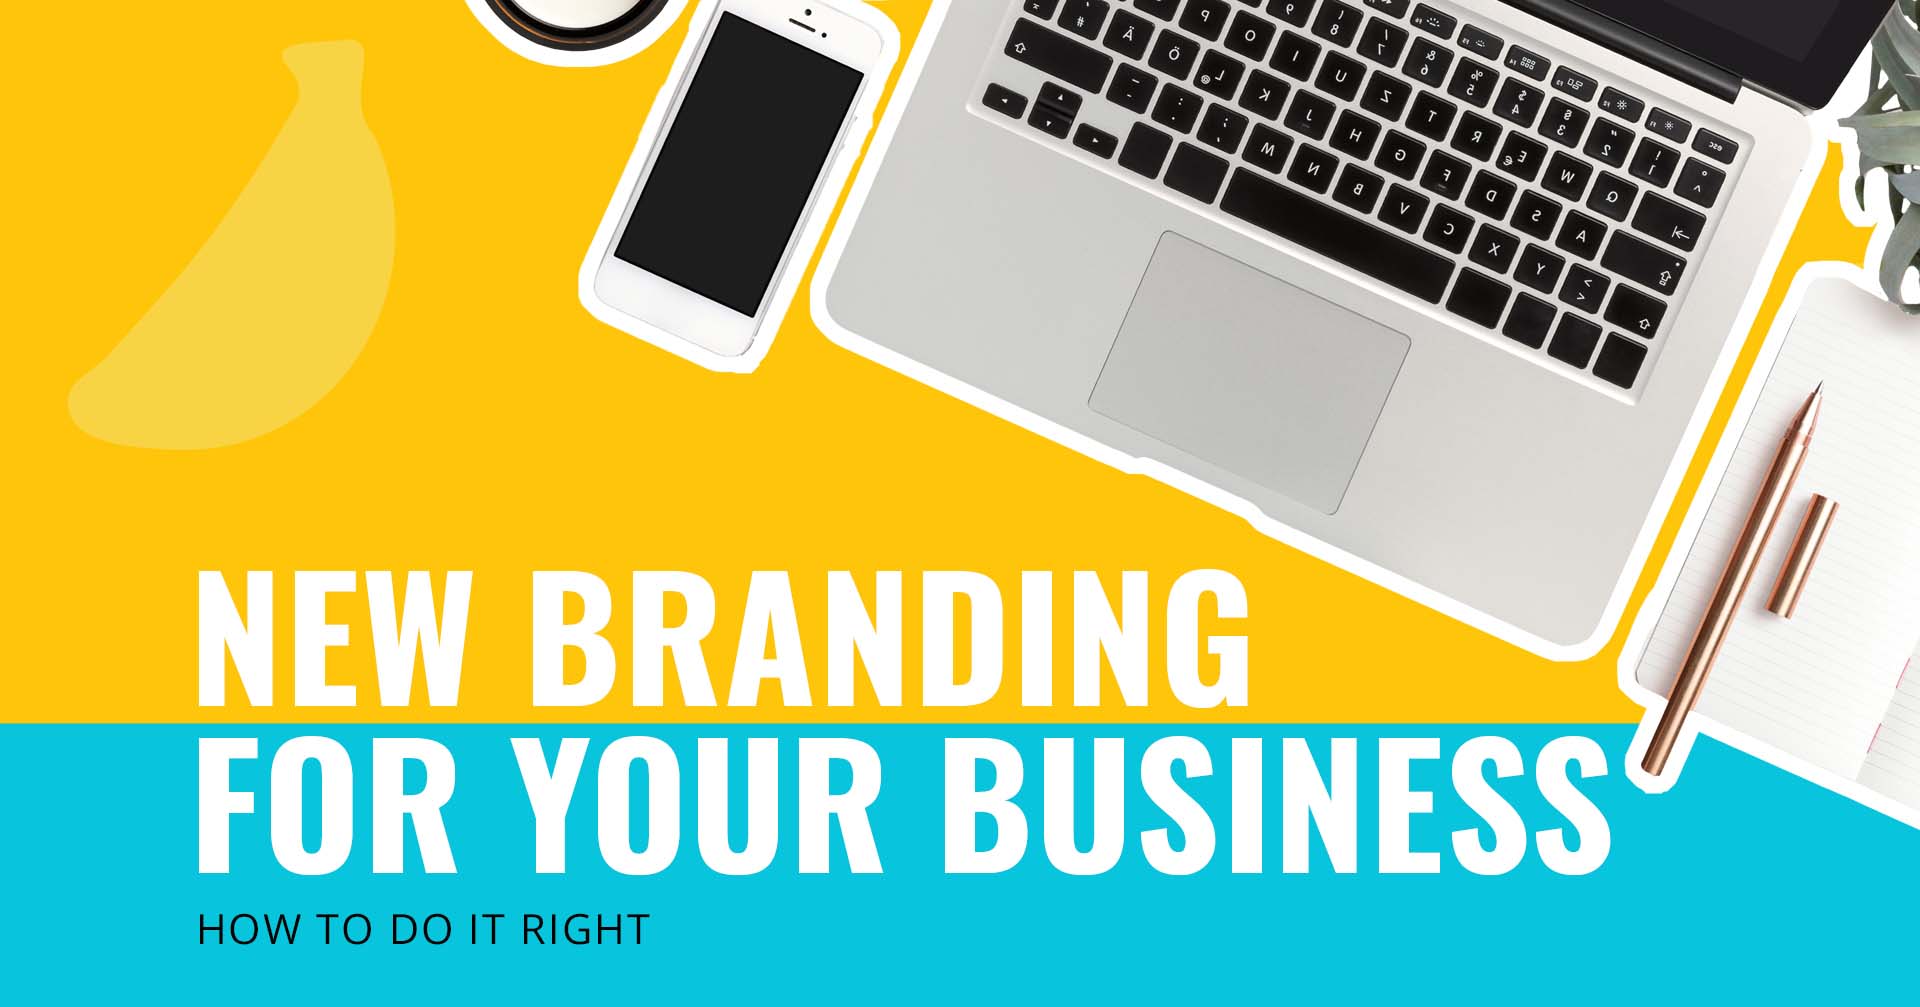 Create a completely new branding for your business.